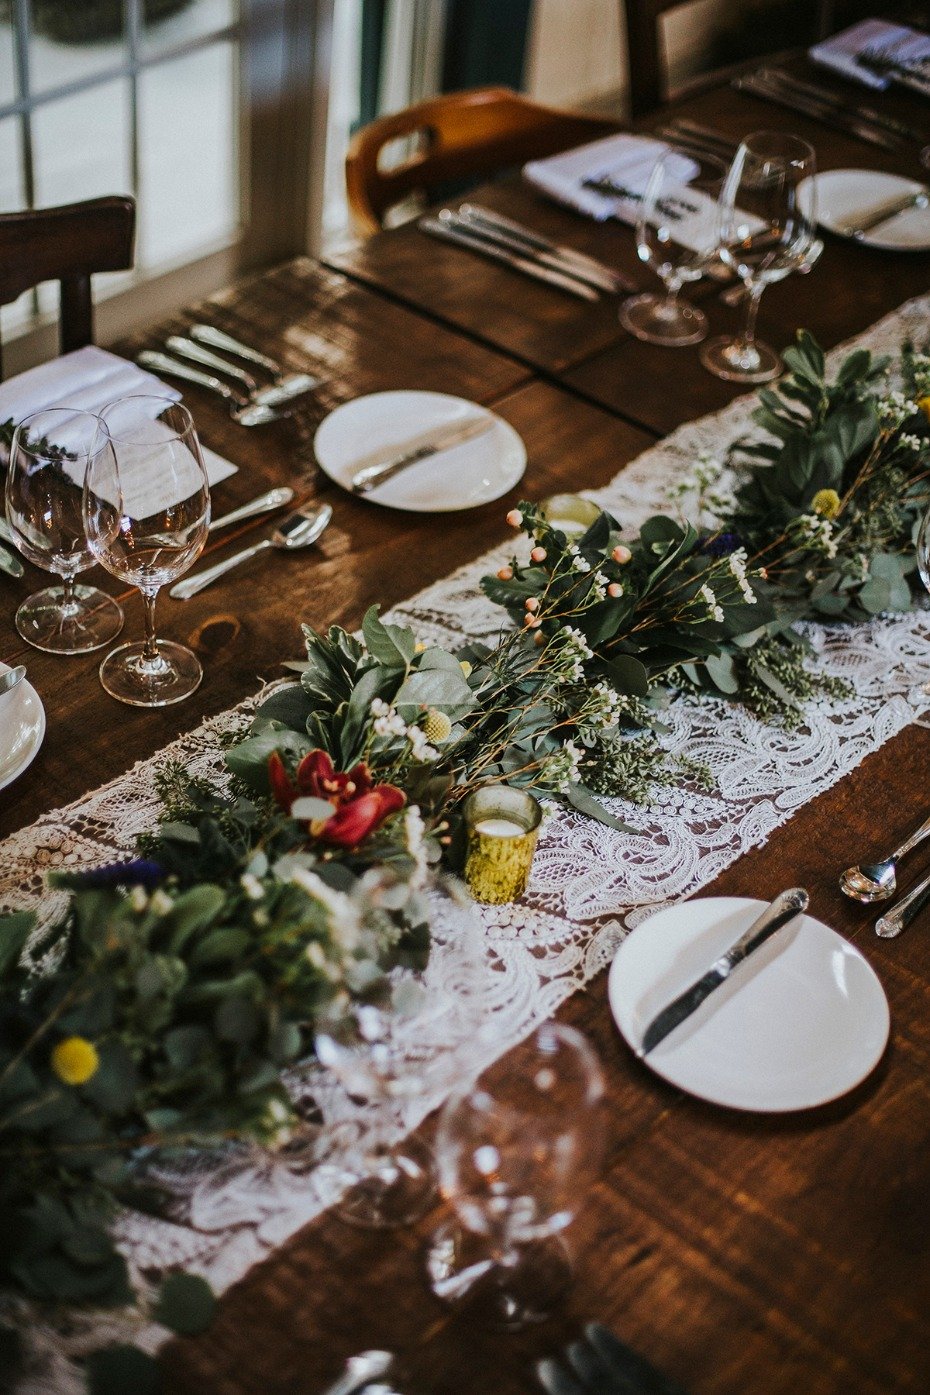 lacy table runner and wildflower garland